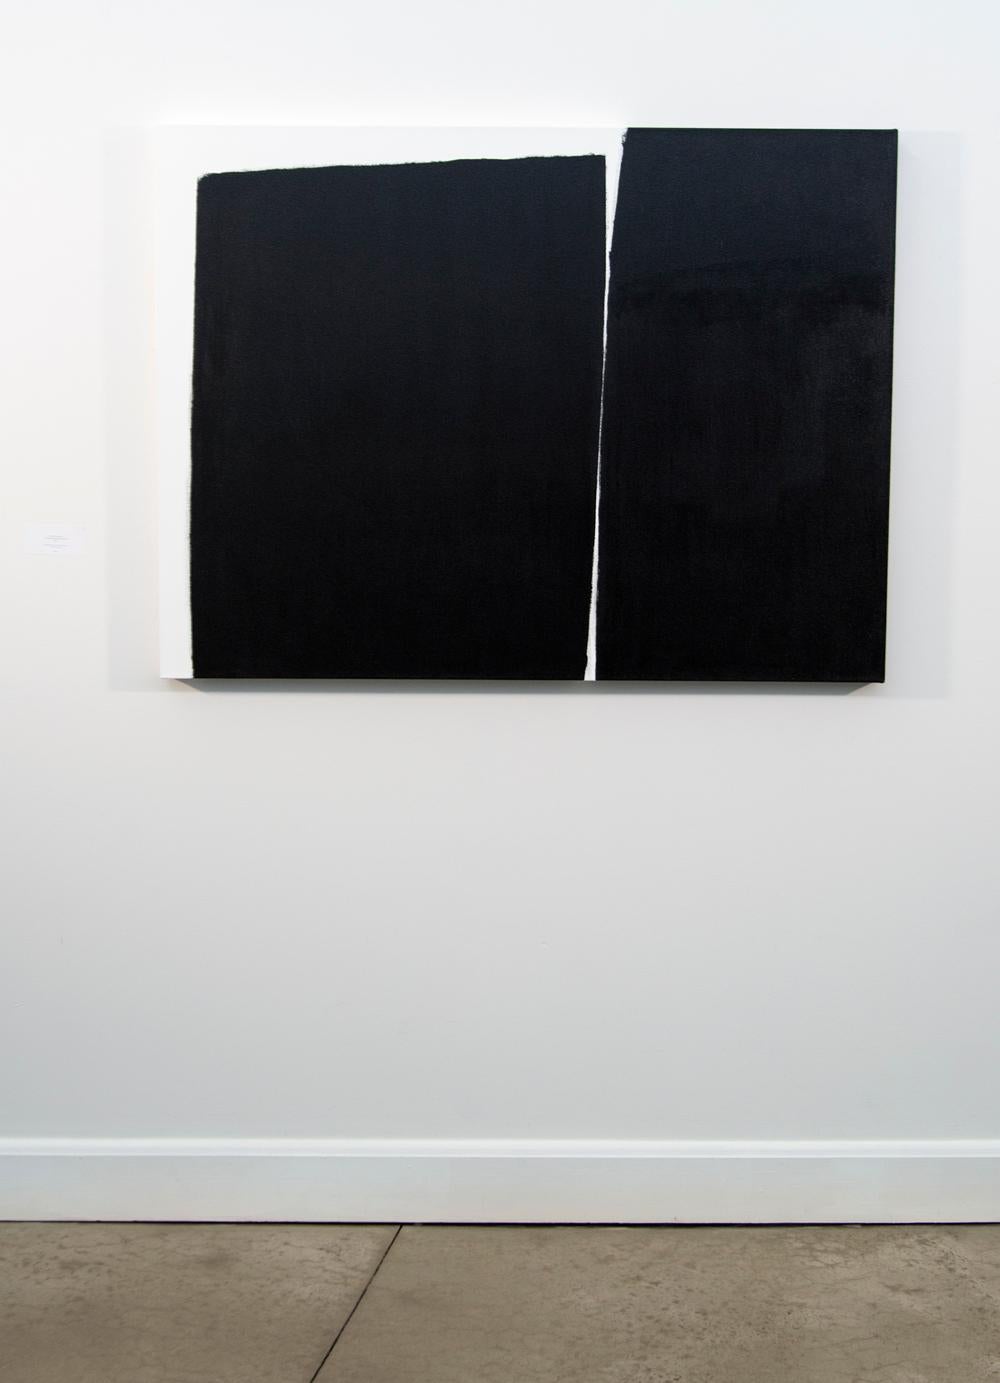 In his bold black and white paintings Canadian abstract artist, Tim Forbes explores gesture, spatial tension and tonal contrast. Several large modular shapes in jet black dominate these two canvases. This is part of a series Forbes created that